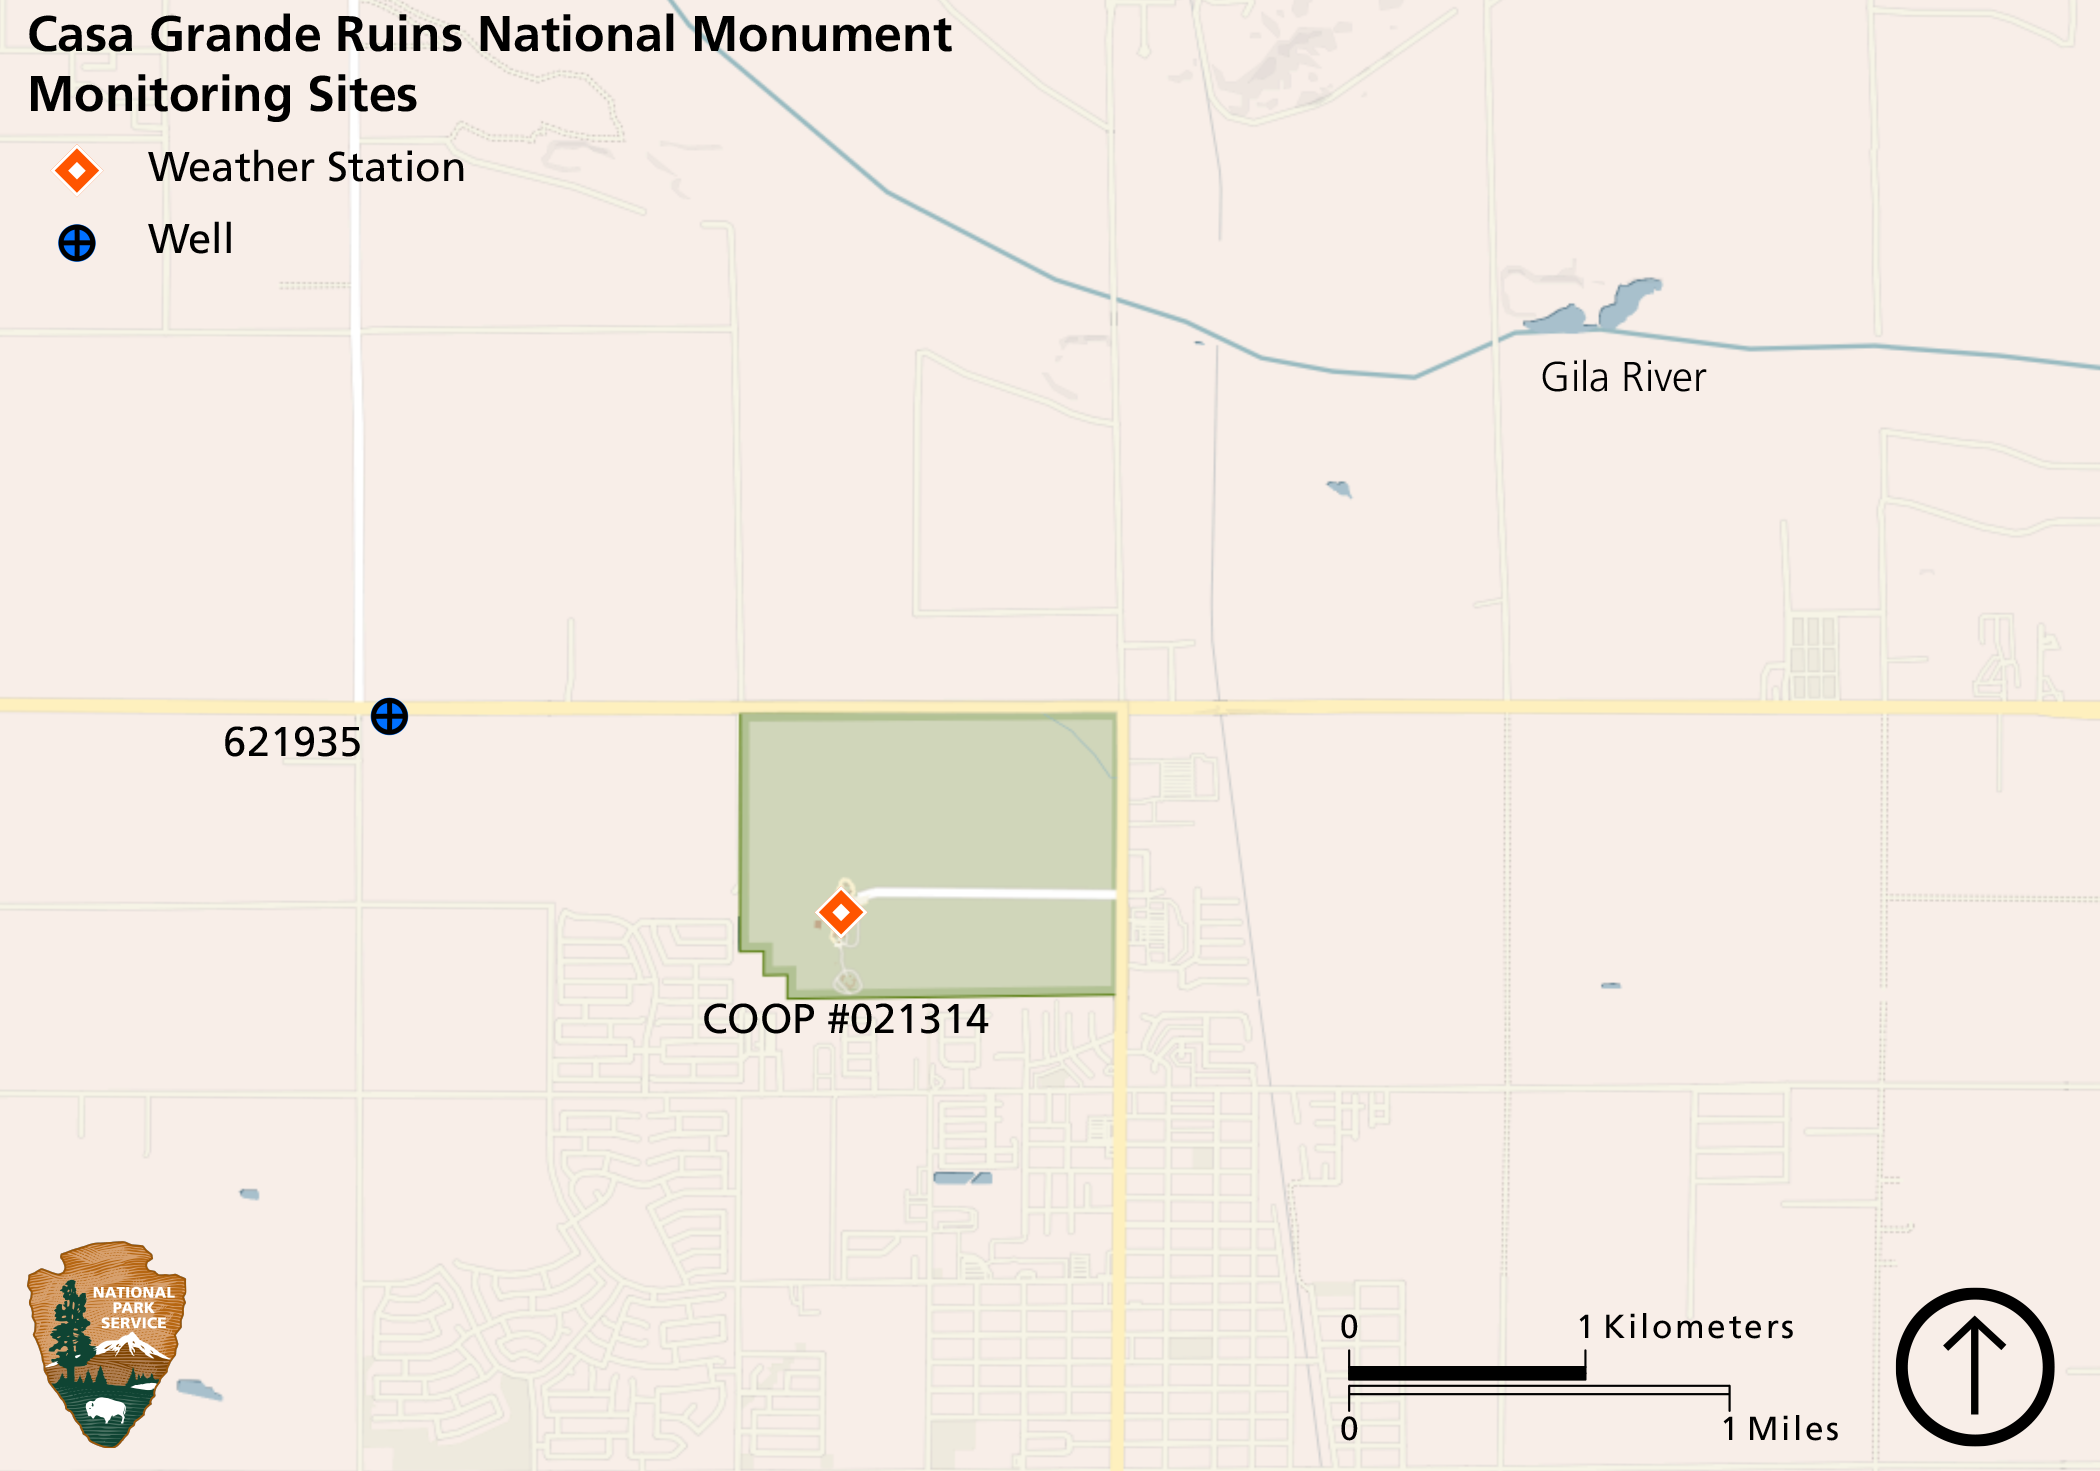 Map of Casa Grande Ruins National Monument of the monitored weather station in the park and the groundwater monitoring well about one mile from the park boundary.